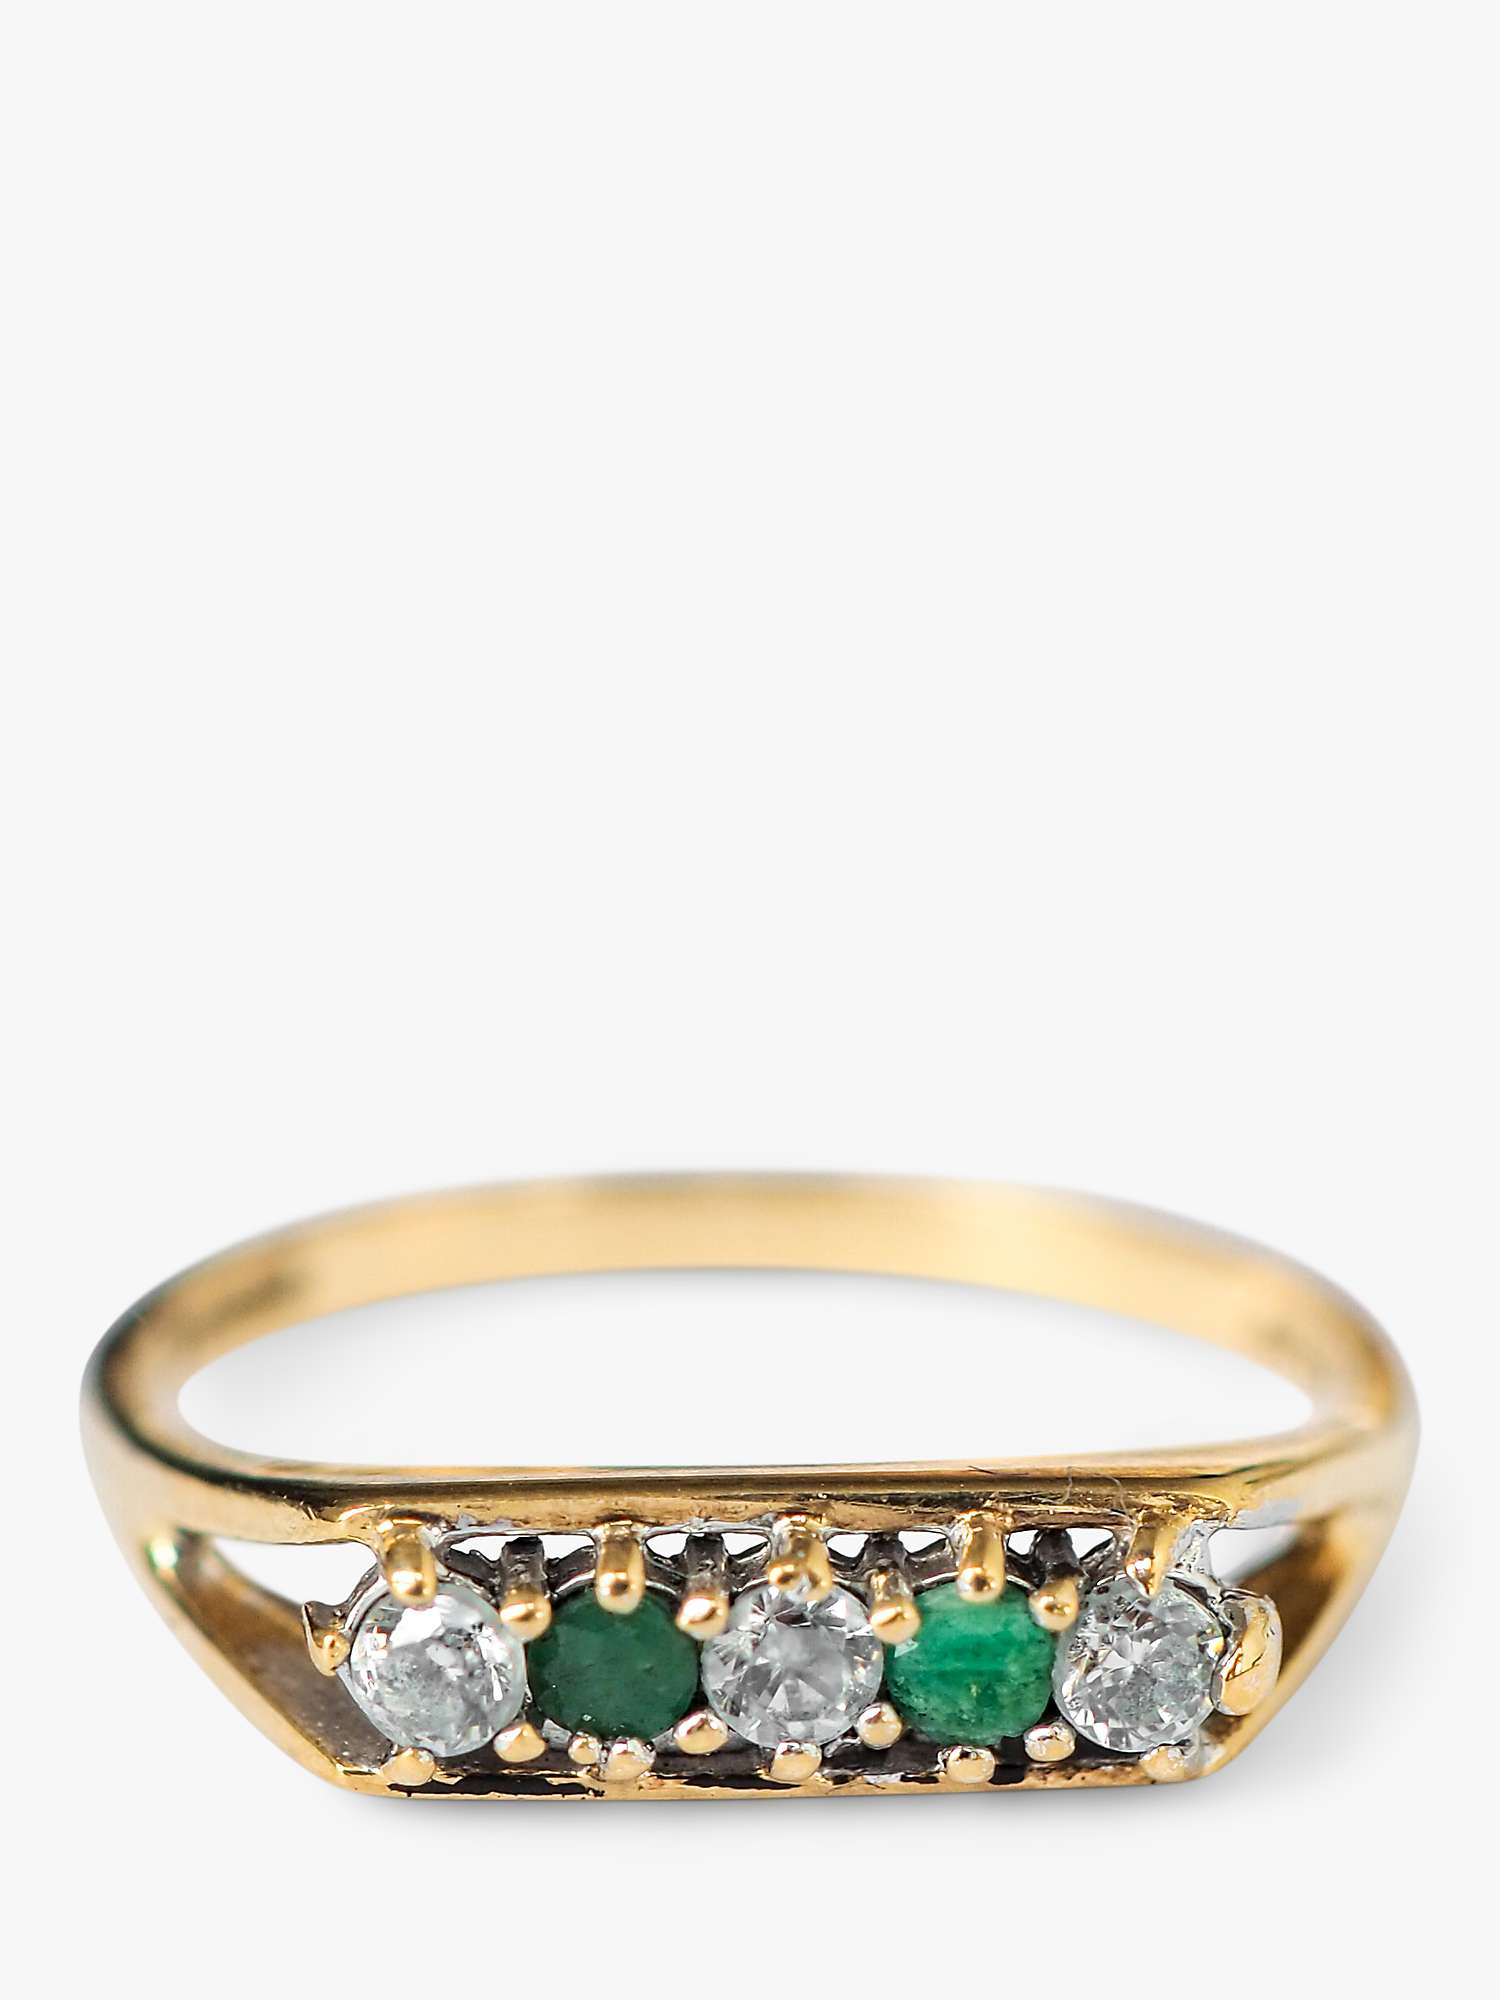 Buy L & T Heirlooms Second Hand 9ct Gold Diamond and Emerald Ring, Dated Circa 1990 Online at johnlewis.com